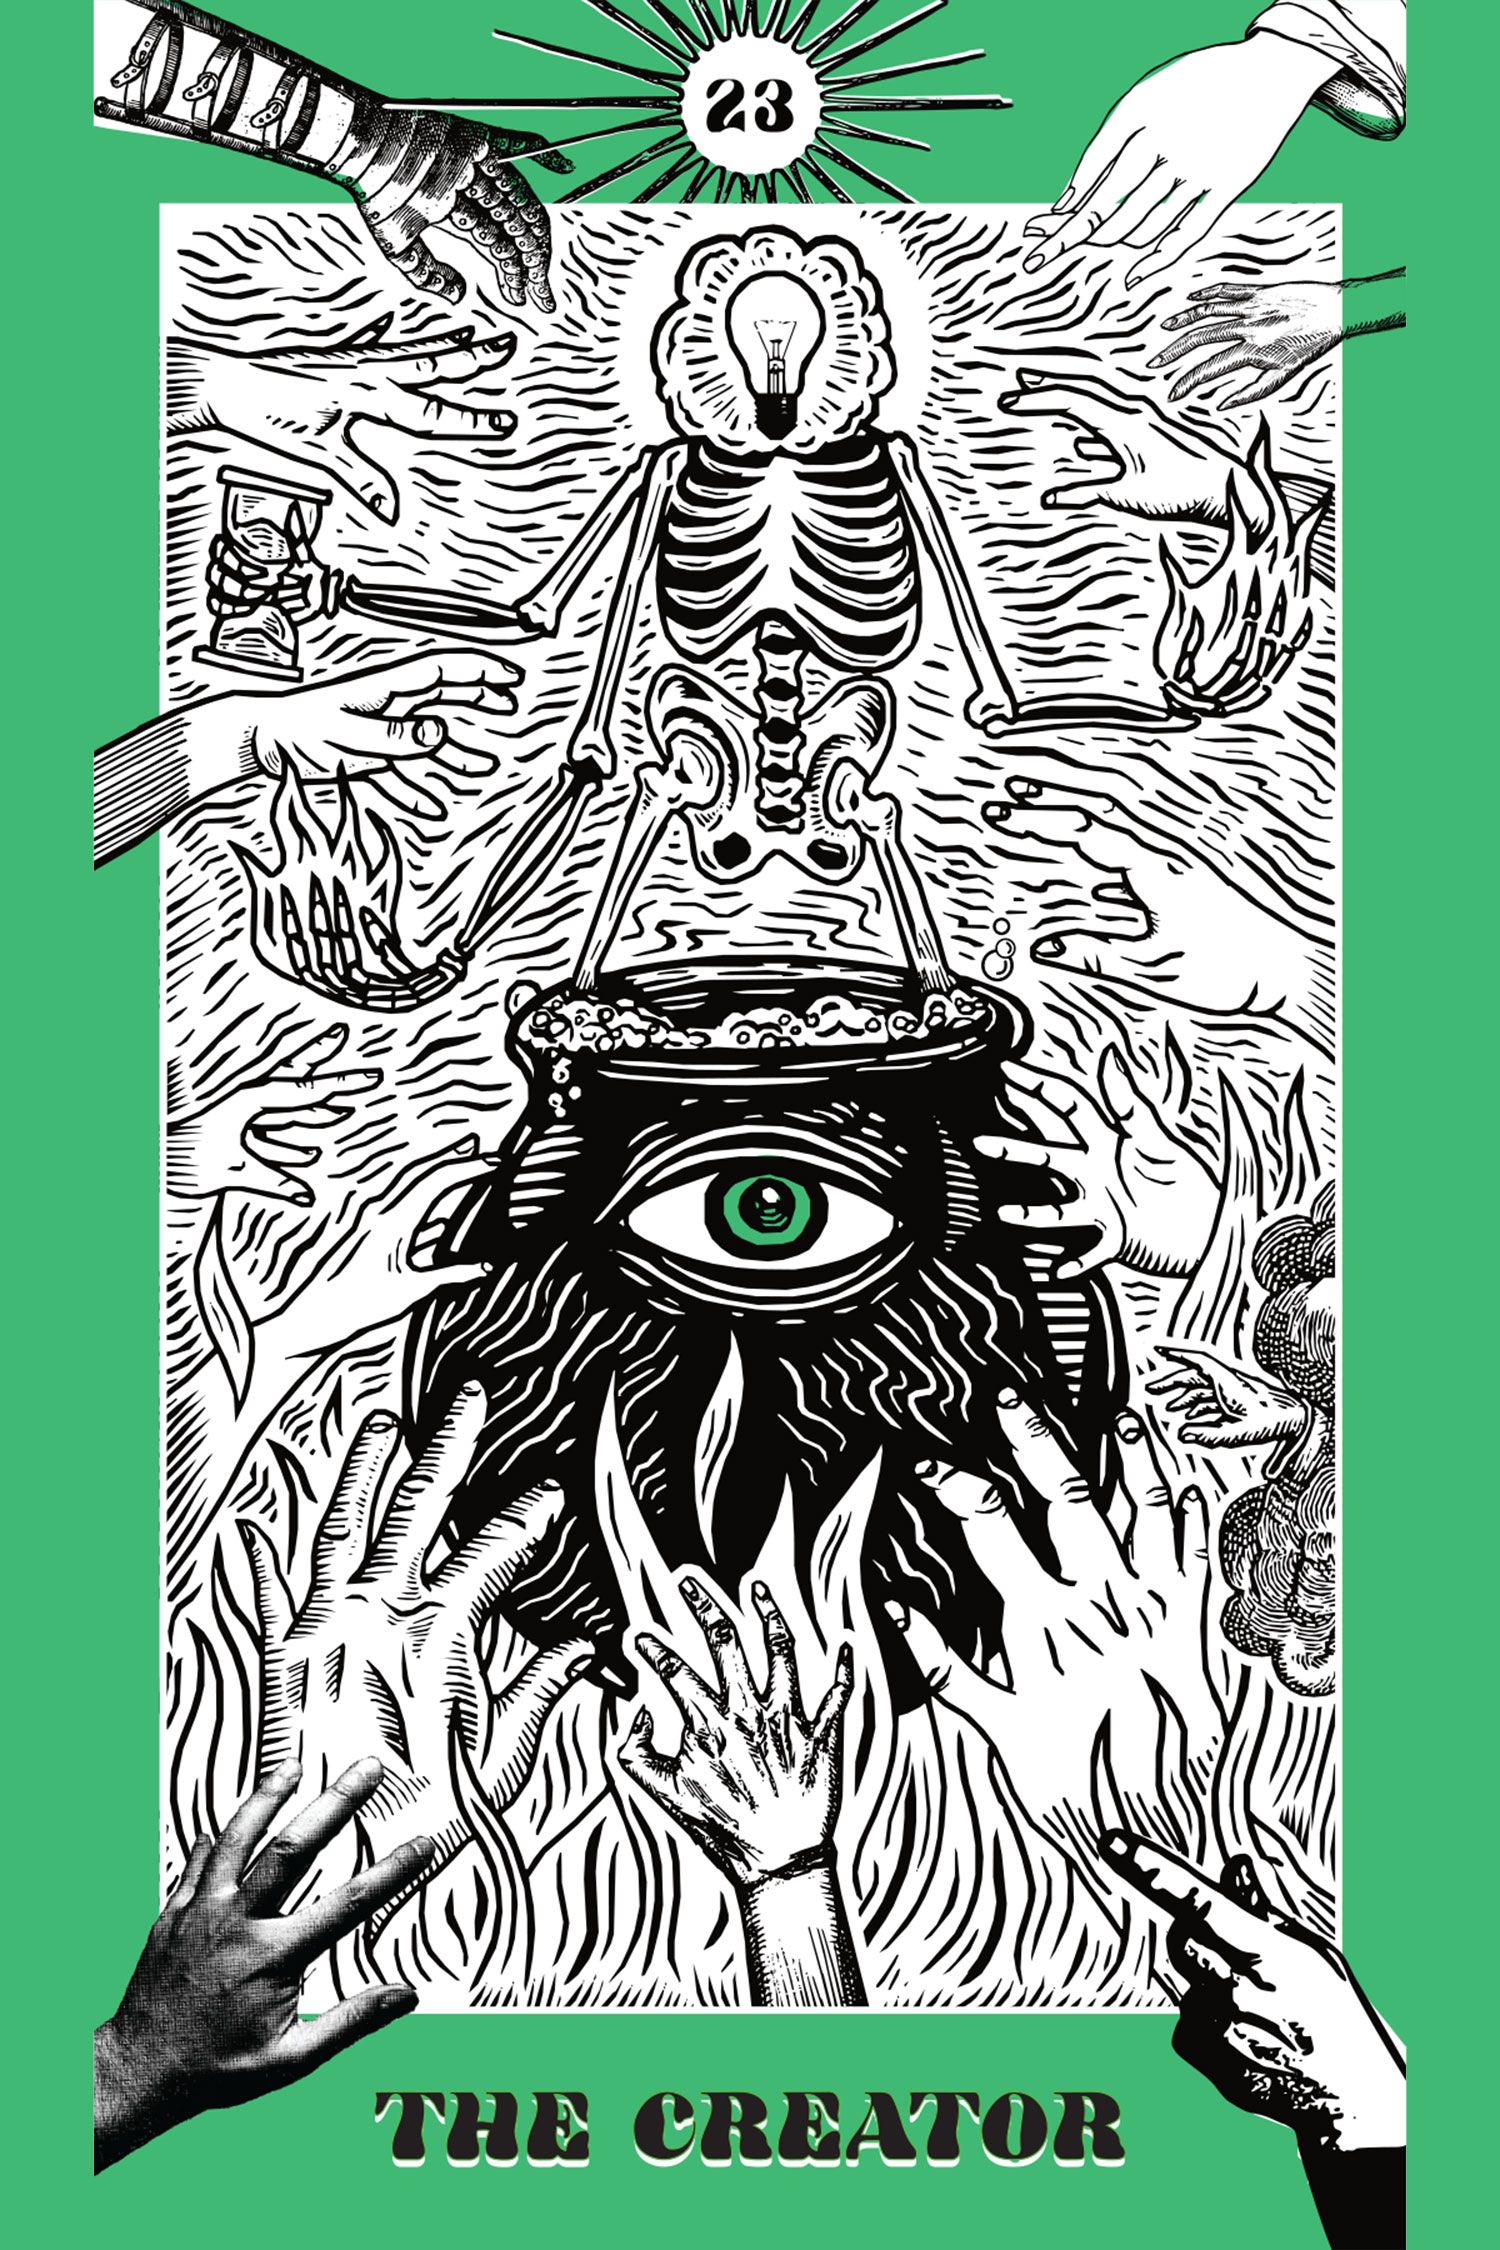 Tarot card featuring a bubbling cauldron with an eyeball. It is surrounded by flames.